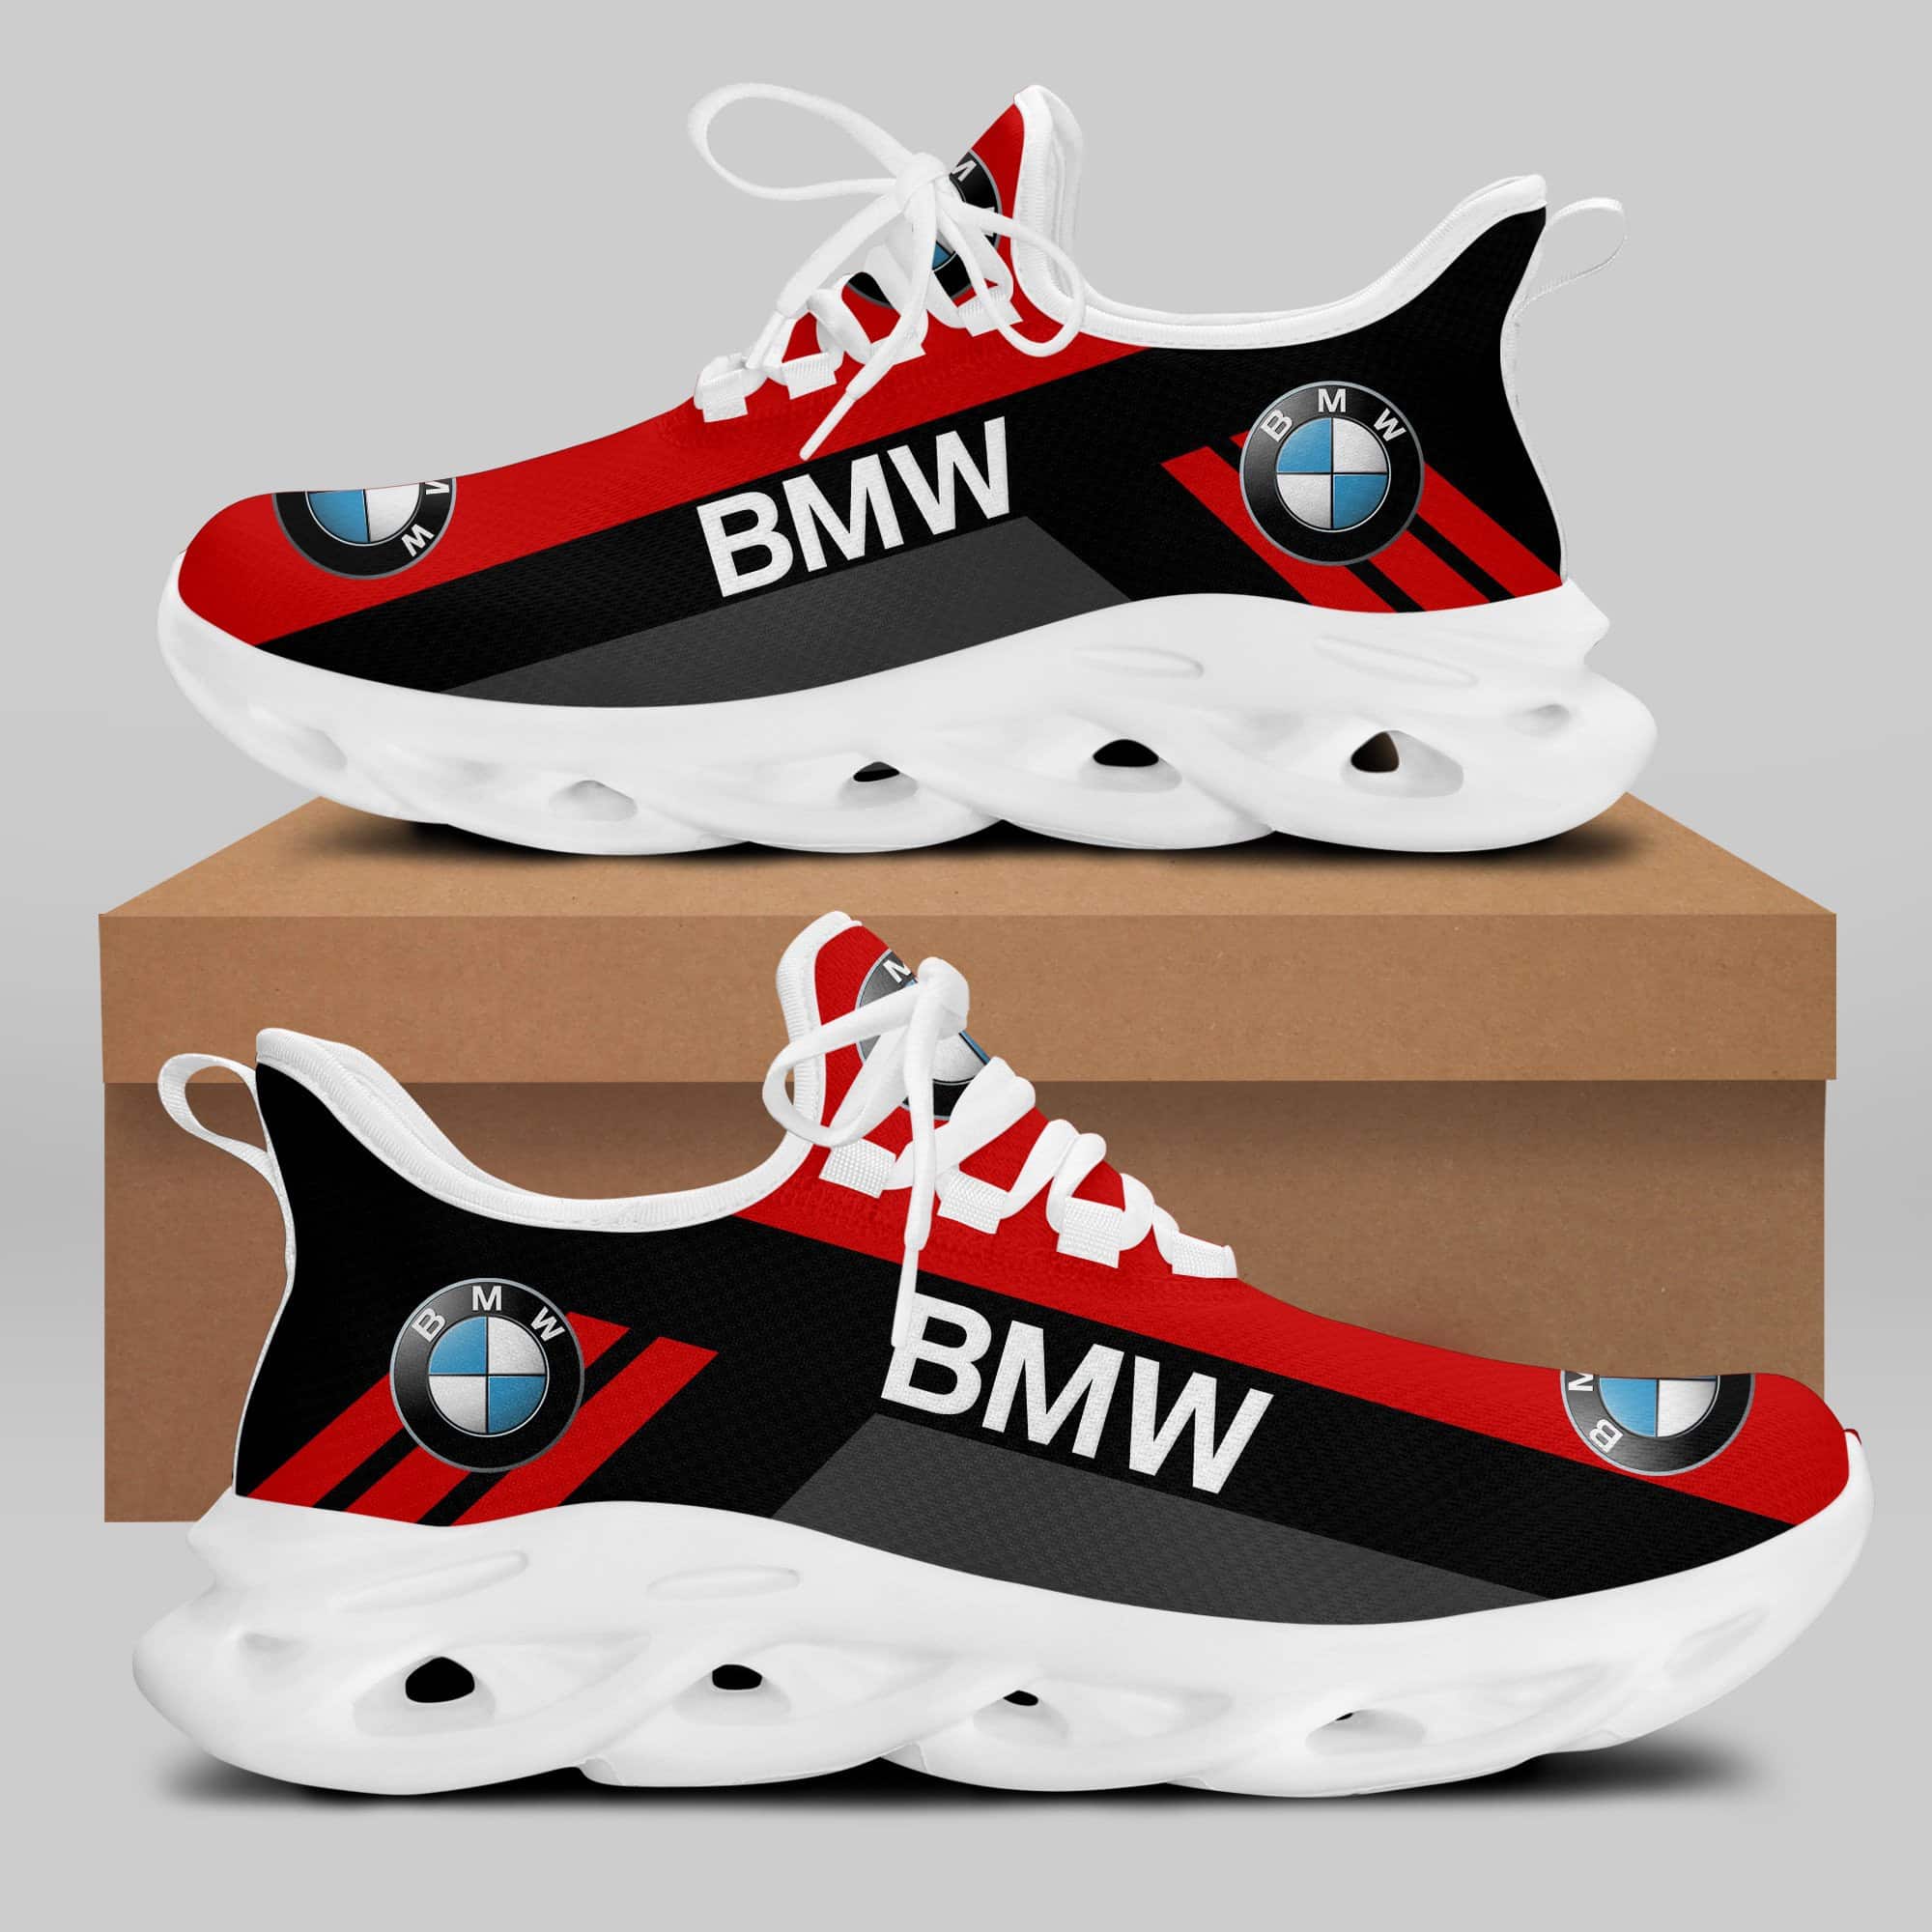 Bmw Running Shoes Max Soul Shoes Sneakers Ver 19 2